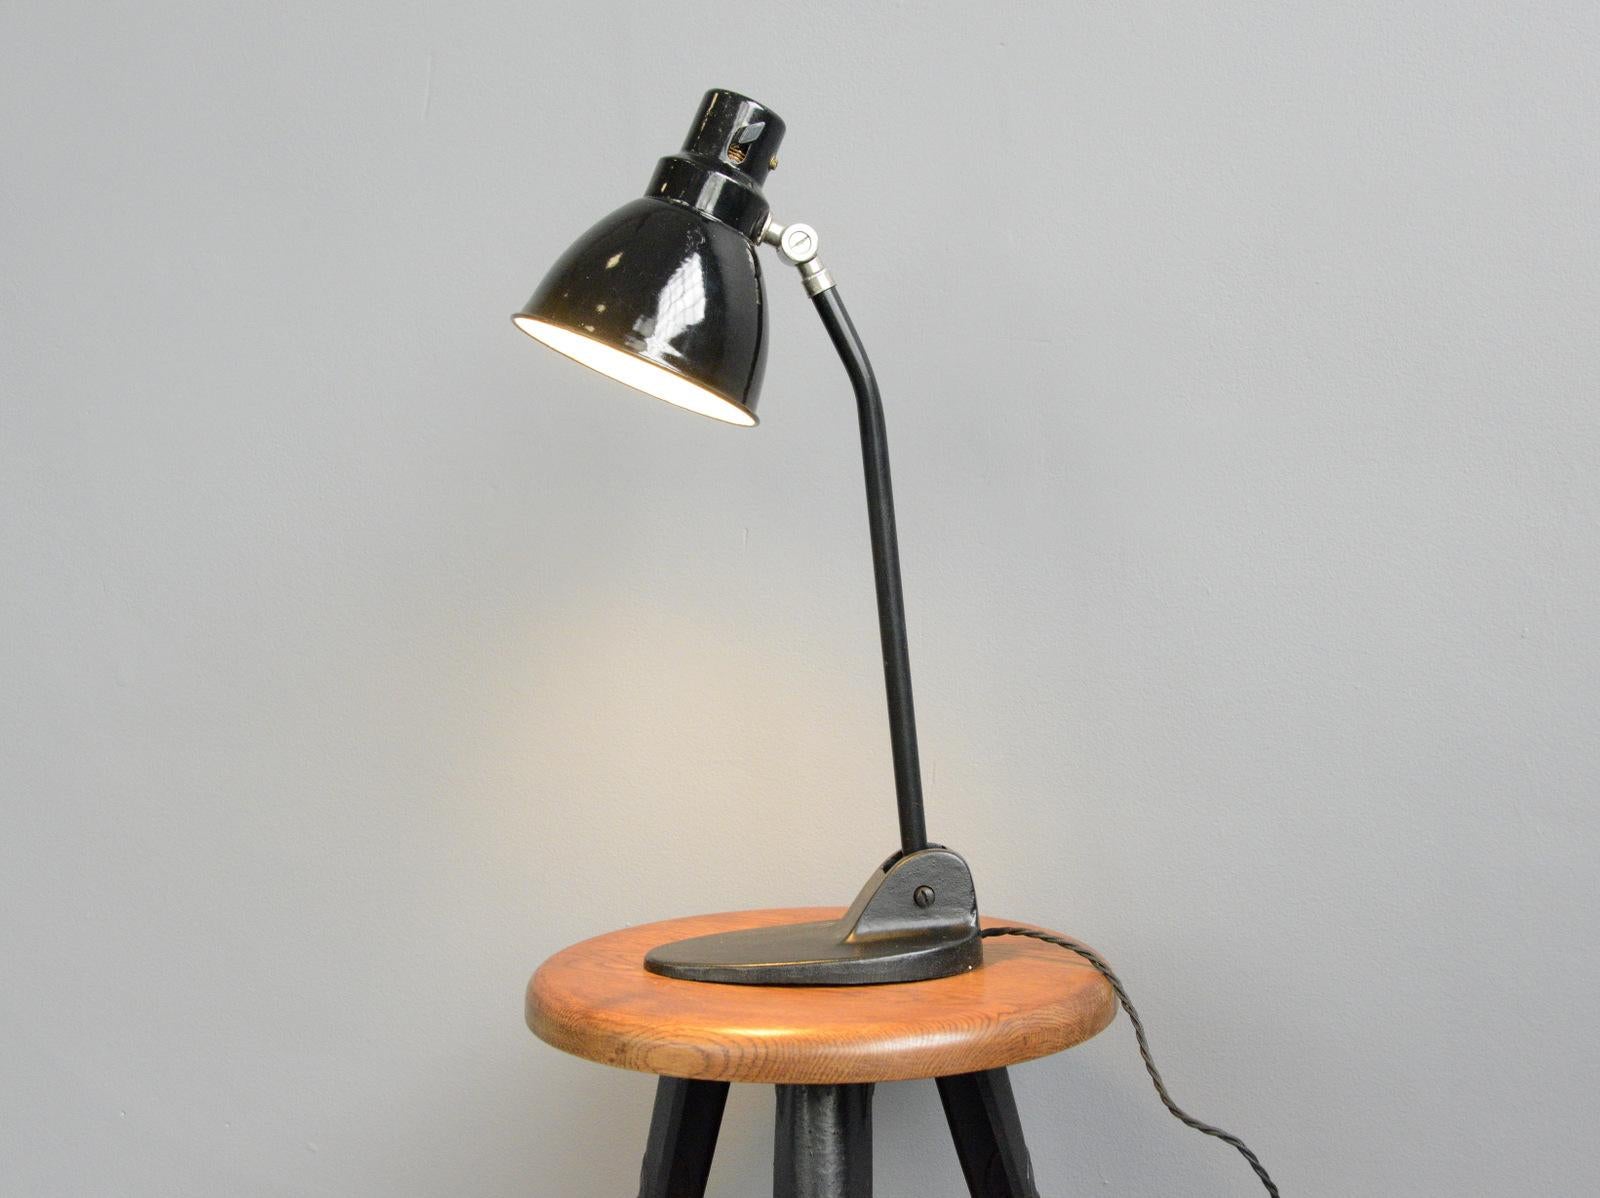 Desk by Pieter Oud for Jacobus, circa 1930s

- Vitreous stepped black enamel shade
- Original Bakelite toggle On/Off switch
- Cast iron base
- Adjustable arm and shade
- Takes E27 fitting bulbs
- Designed by Dutch designer Pieter Oud
-